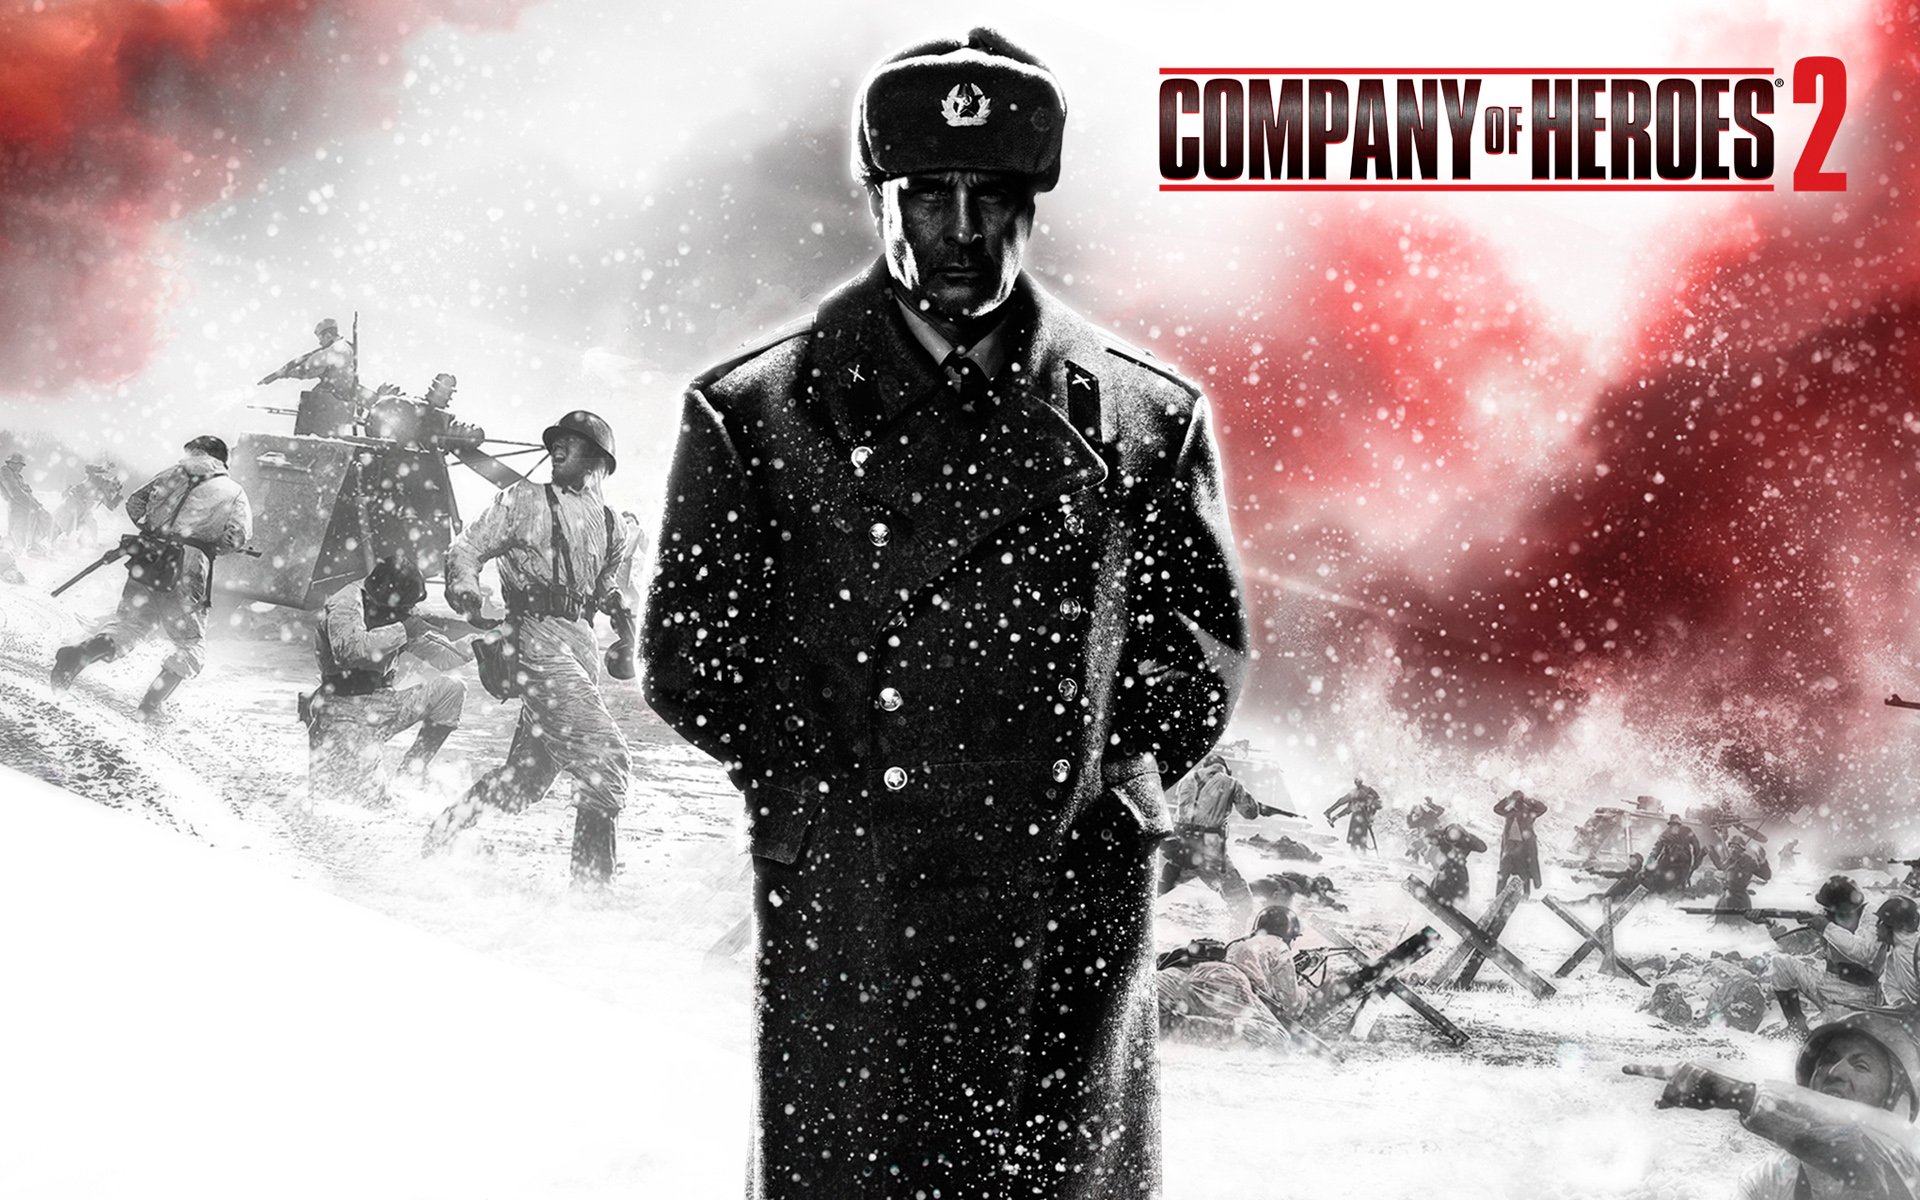 company of heroes 1 reinforce all